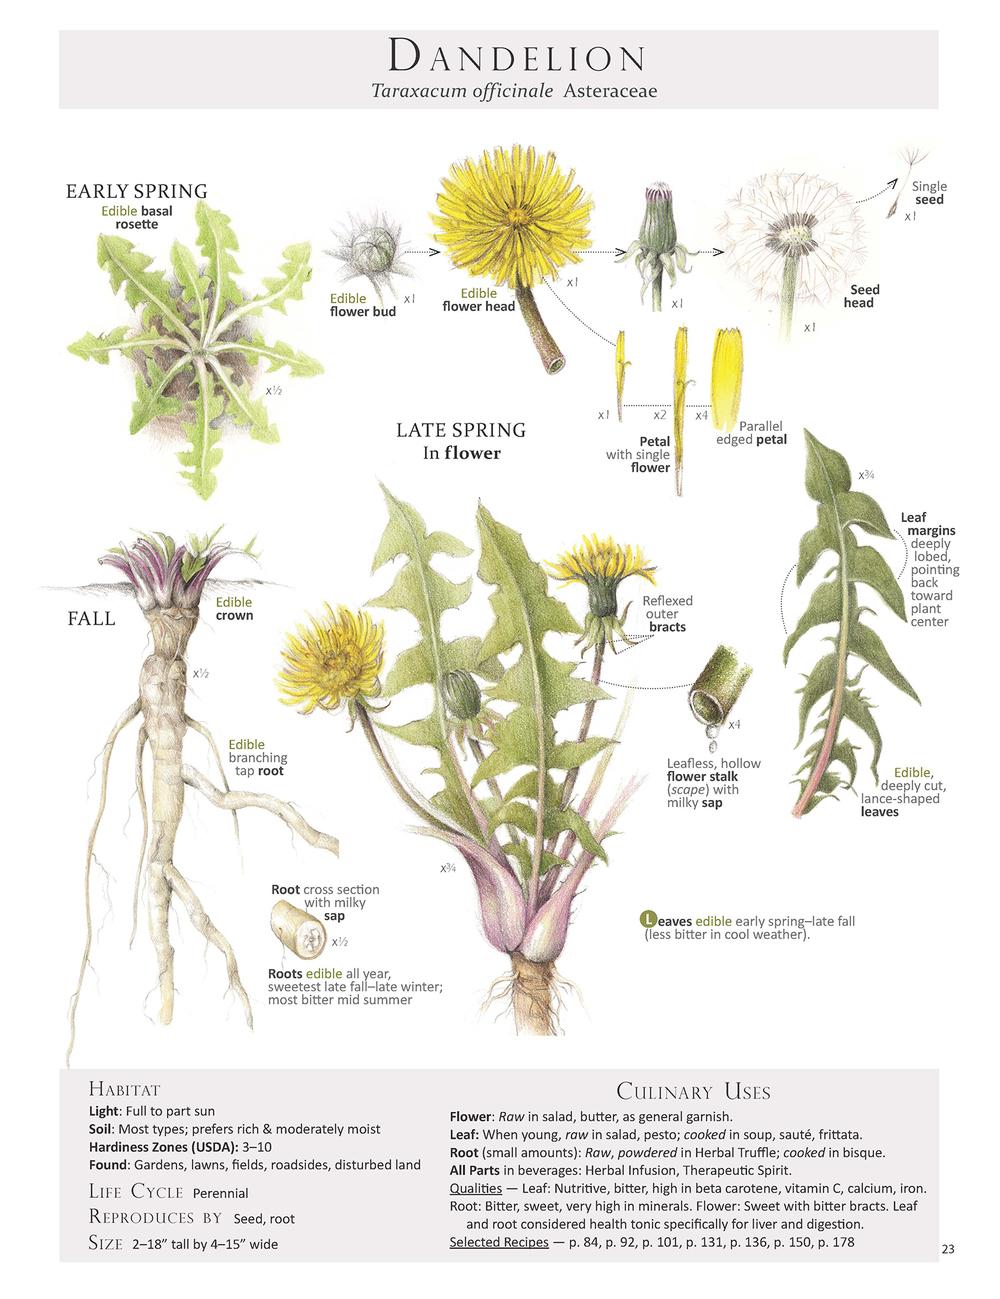 various parts of the dandelion and when they can be harvested